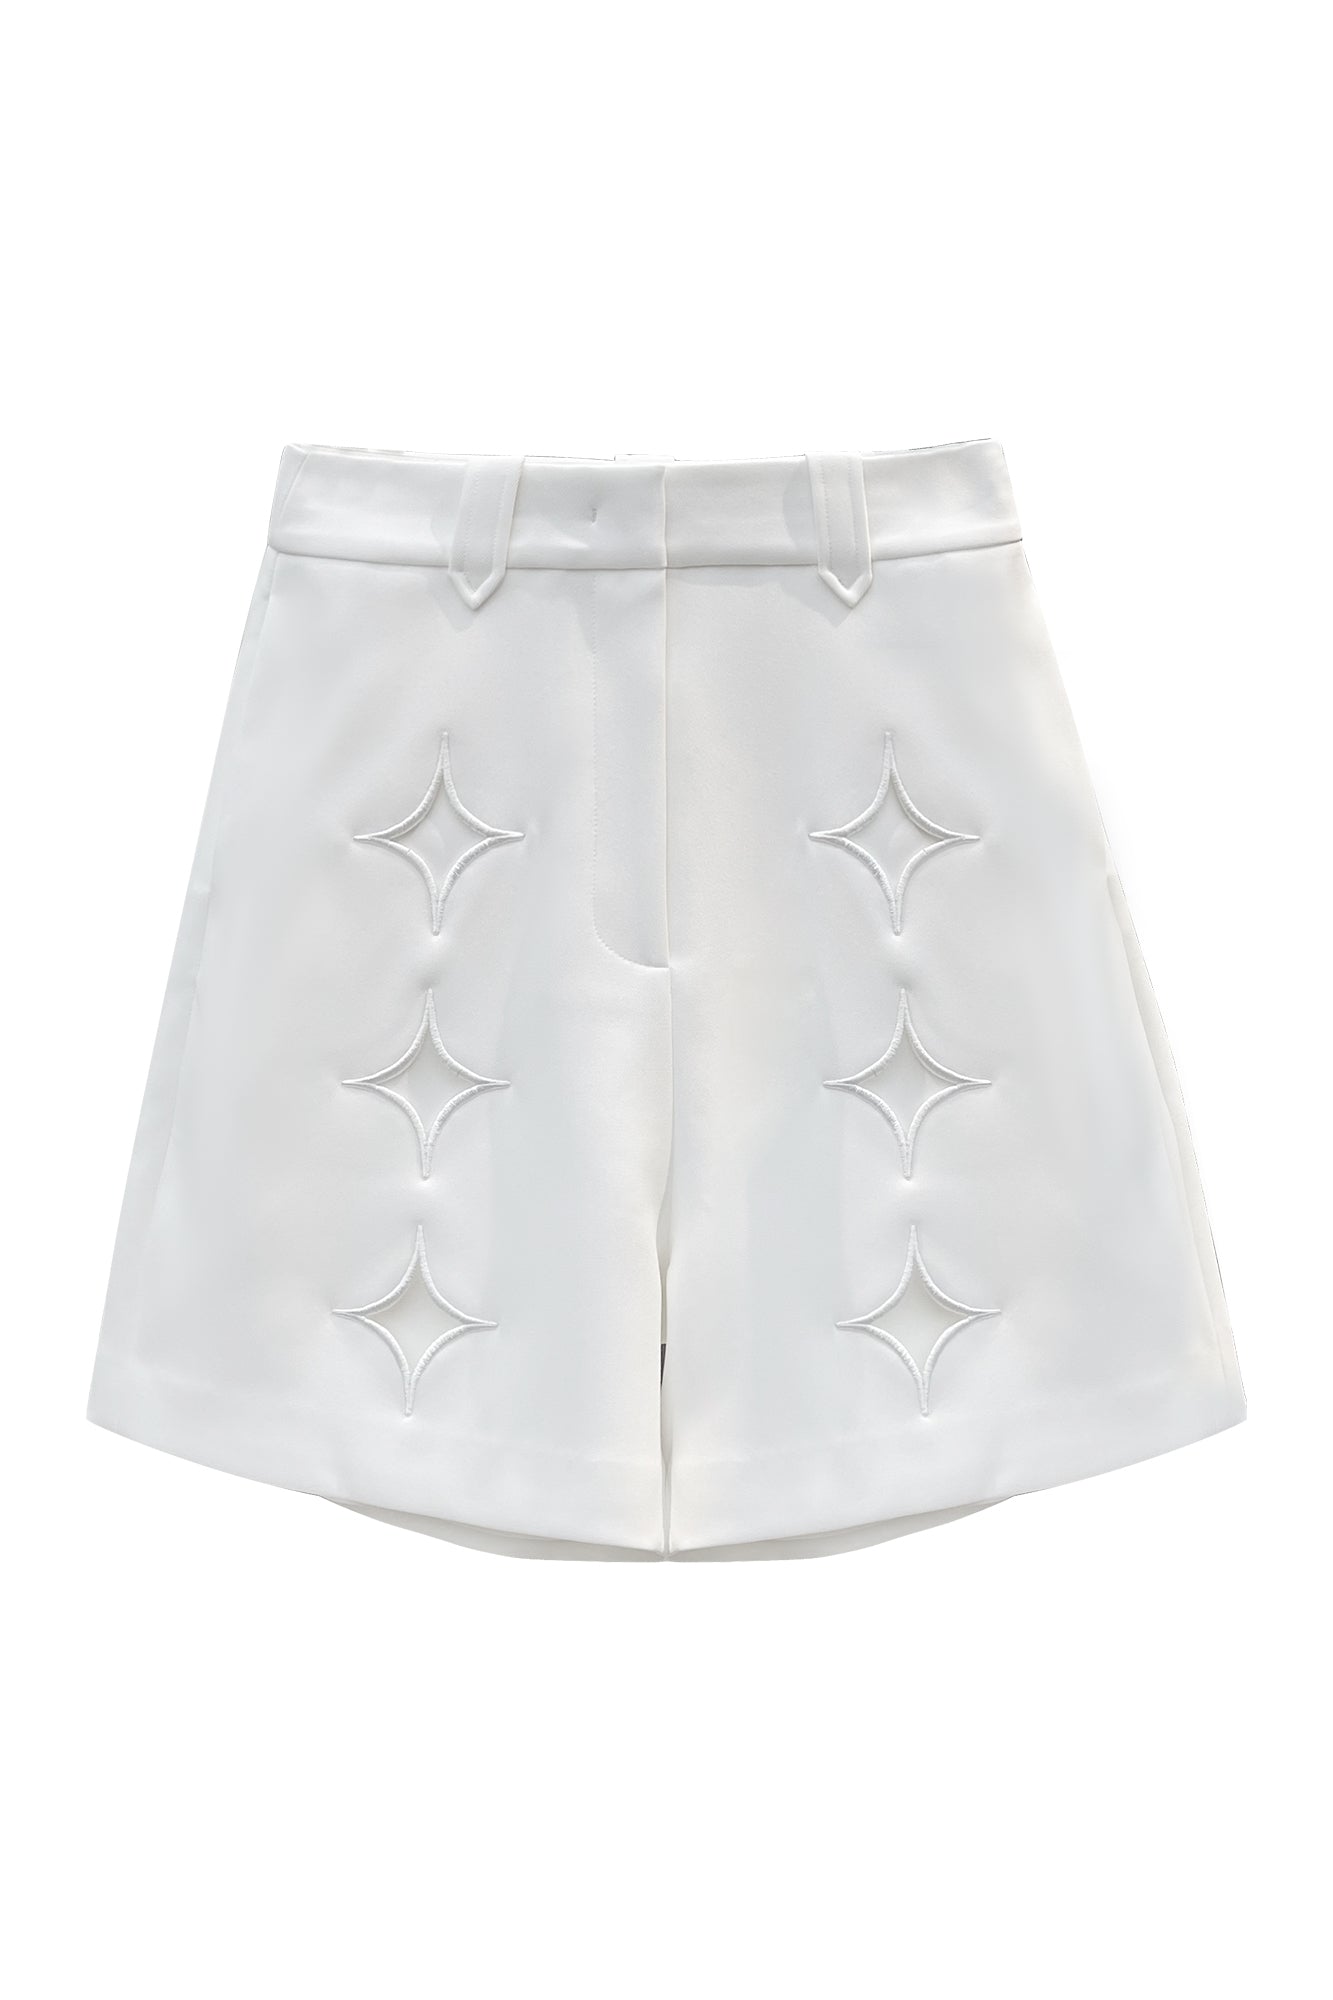 Cut-out four-pointed star shorts